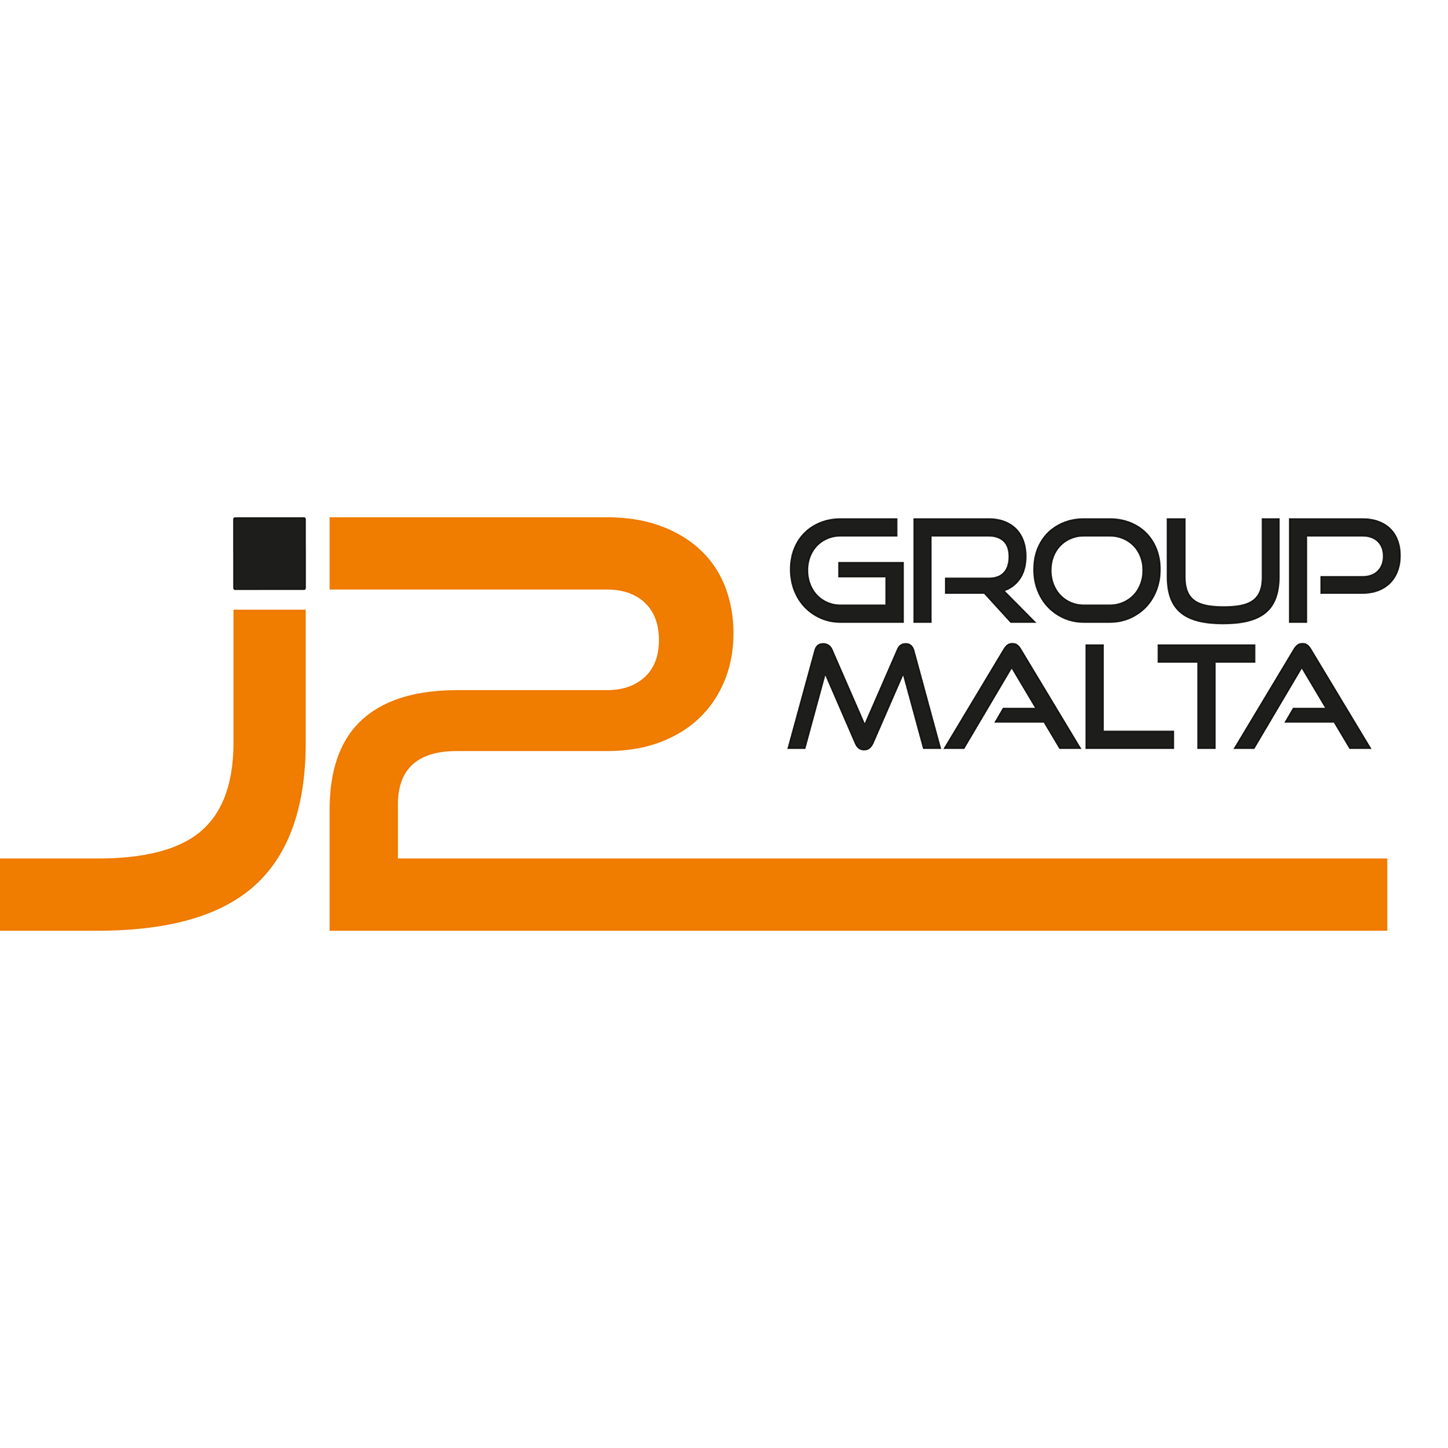 J2 Group Malta profile on Qualified.One